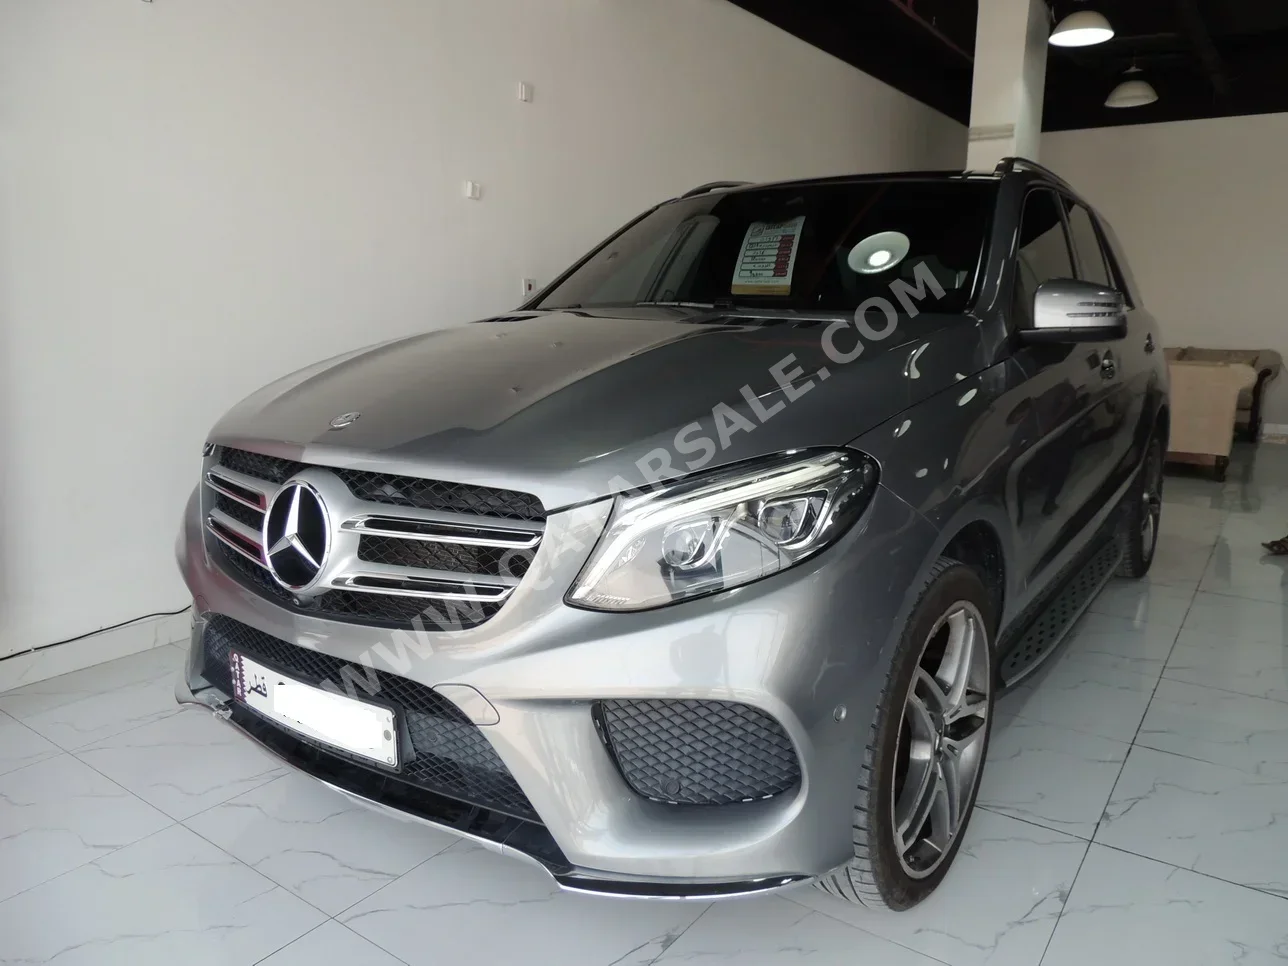 Mercedes-Benz  GLE  400  2016  Automatic  120,000 Km  6 Cylinder  Four Wheel Drive (4WD)  SUV  Gray